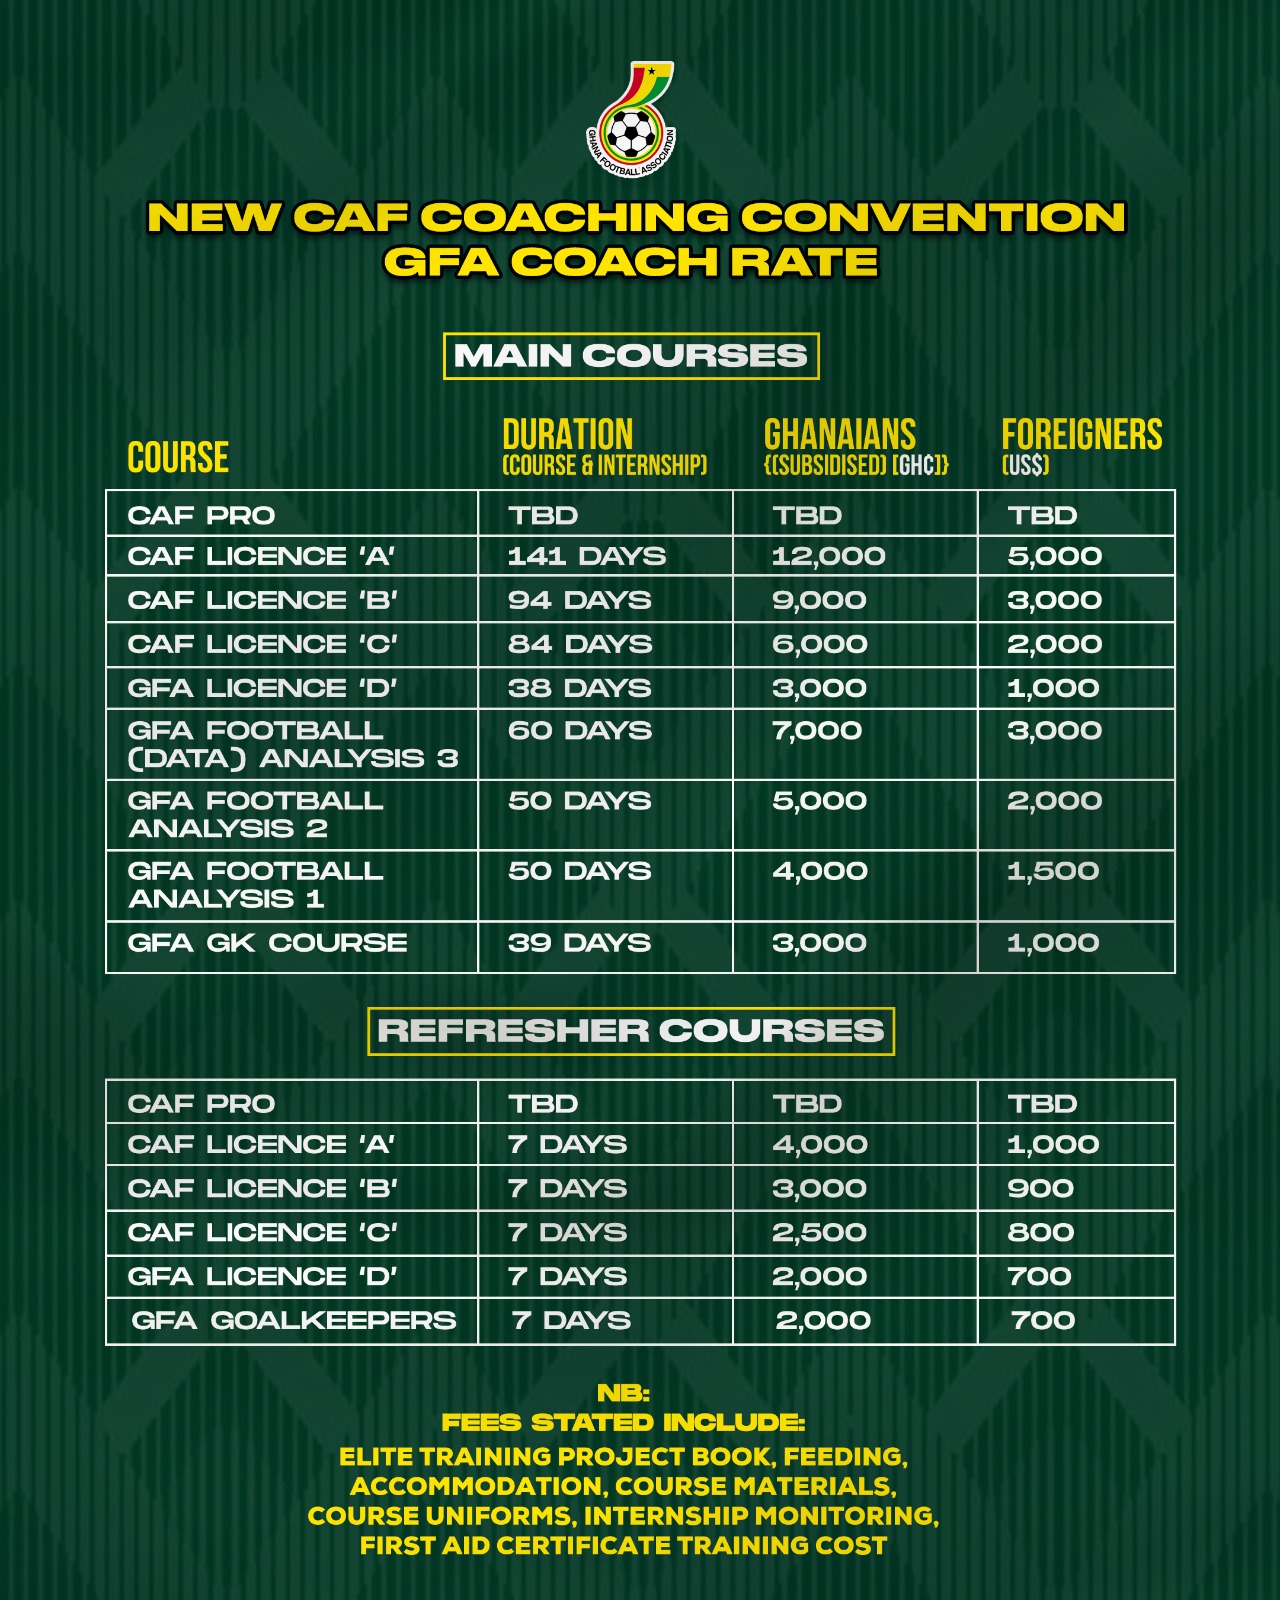 GFA rolls out new structure & rates for CAF Coaching courses